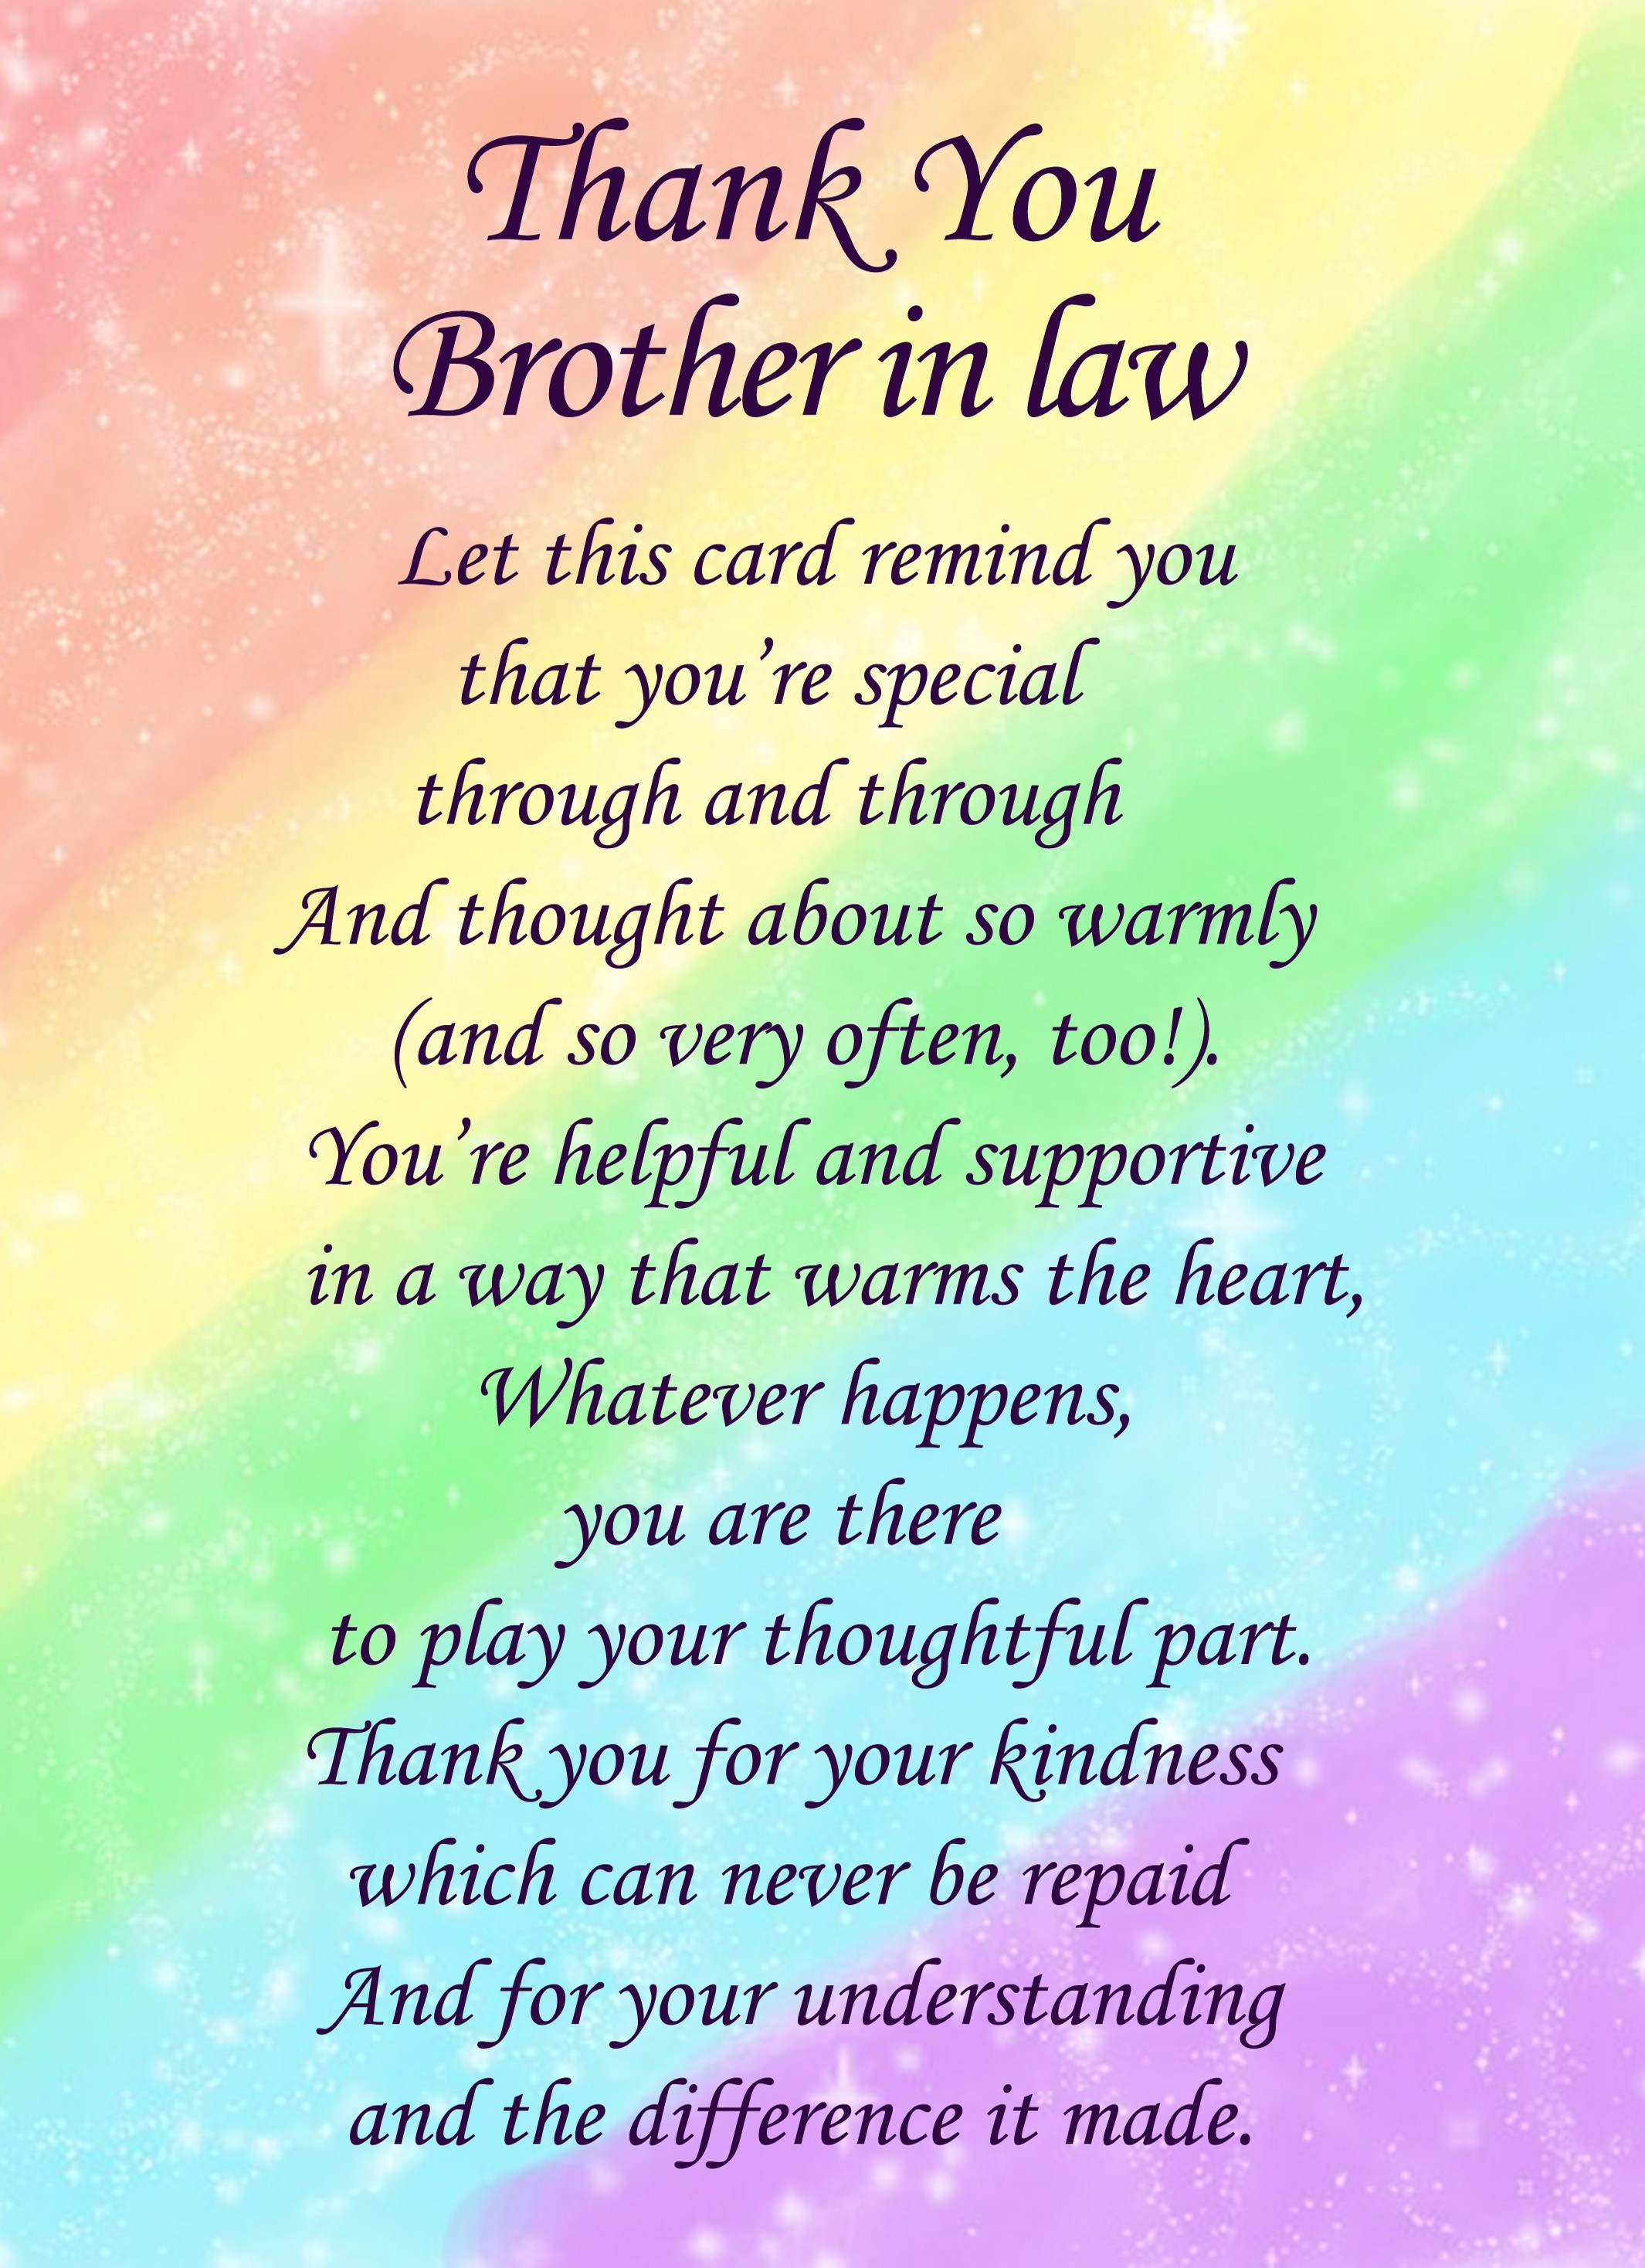 Thank You 'Brother in Law' Poem Verse Greeting Card